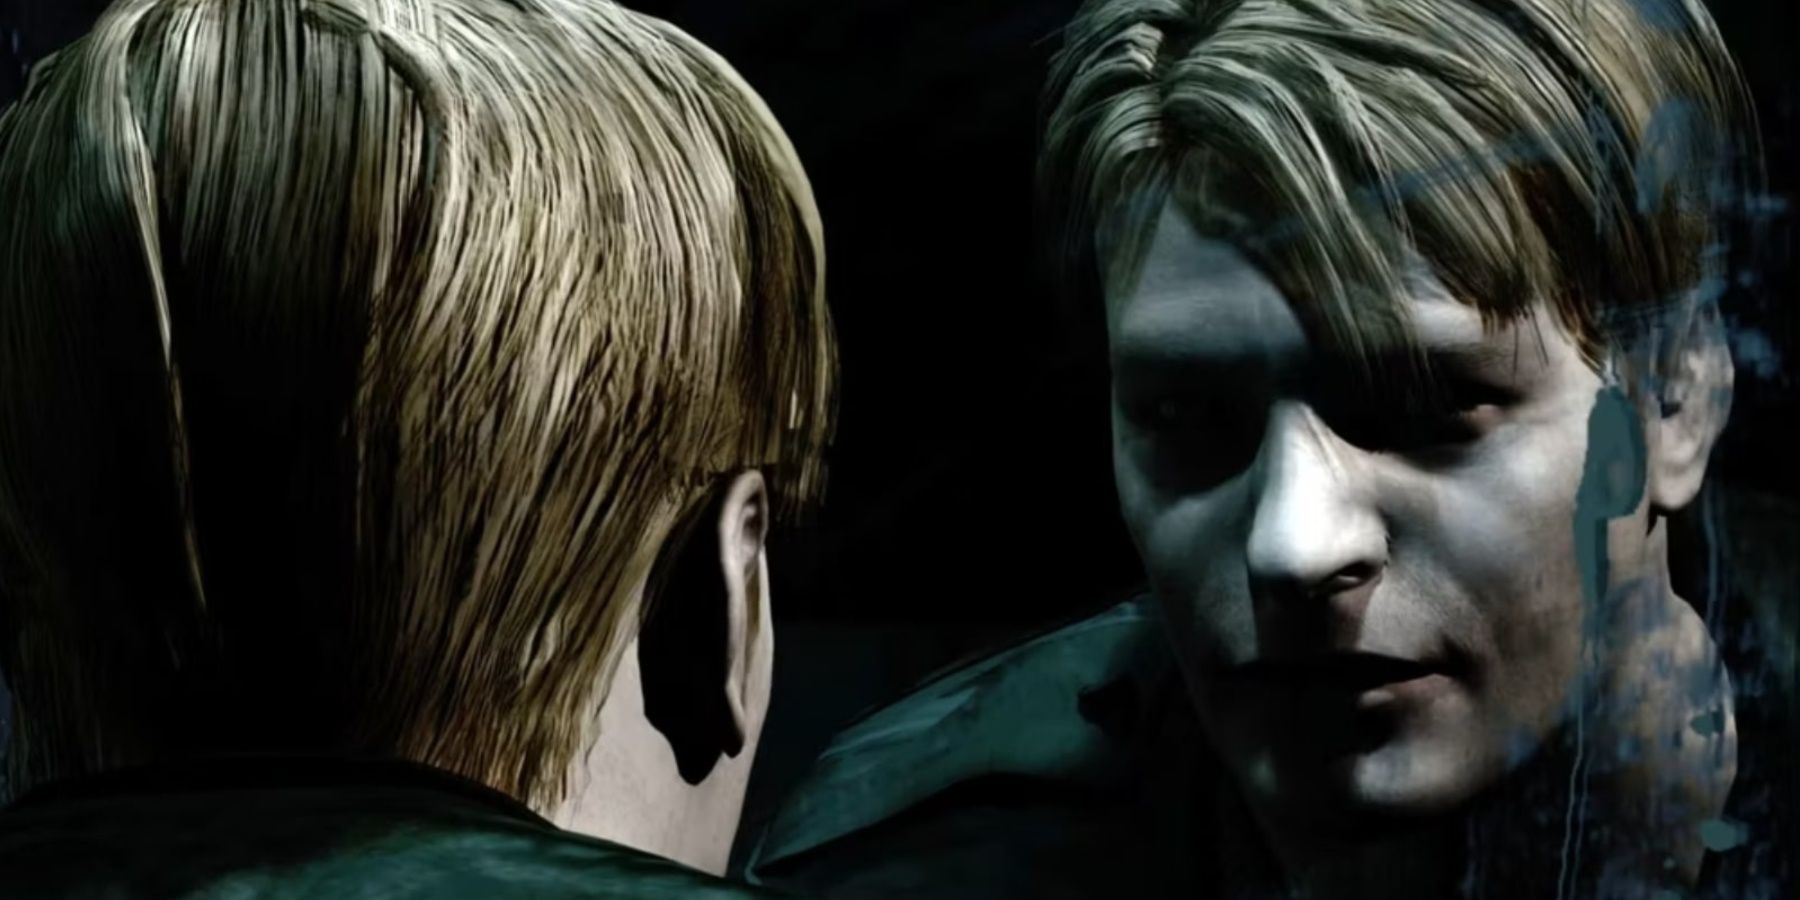 James from Silent Hill 2 staring into a fractured mirror